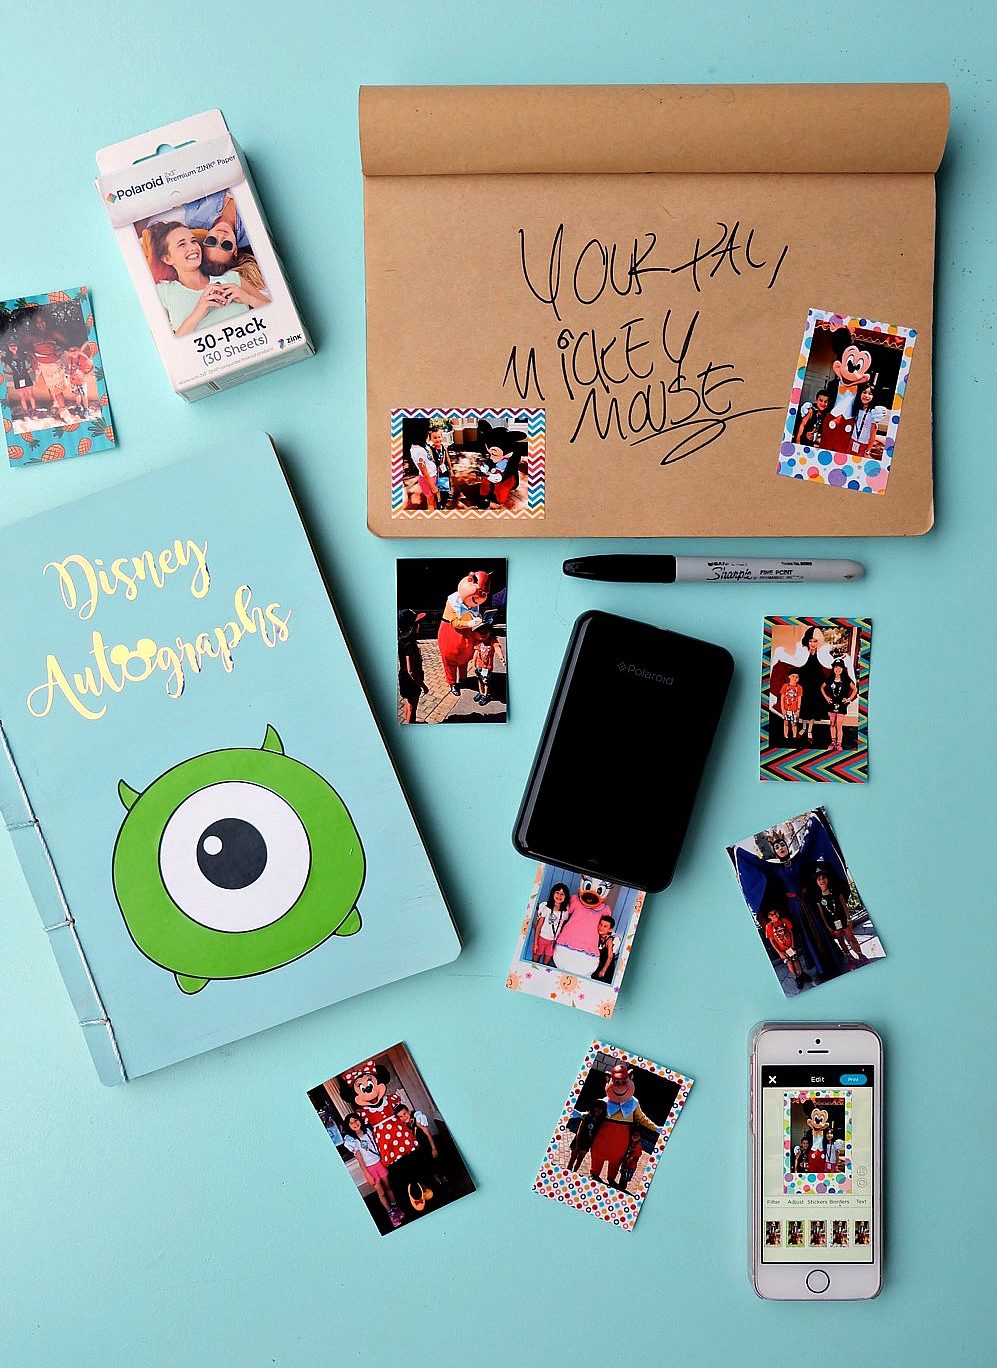 Make every penny count on your next trip to Disneyland or Disney World with this easy Disneyland Autograph Book with Photo Stickers! Turn a dollar store notebook into an awesome keepsake! Load it with fun sticker back photos of your kids posing with their favorite Disney characters! Great for those trying to stick to a budget during their Disney travel plans! #Disney #DIY #Crafts